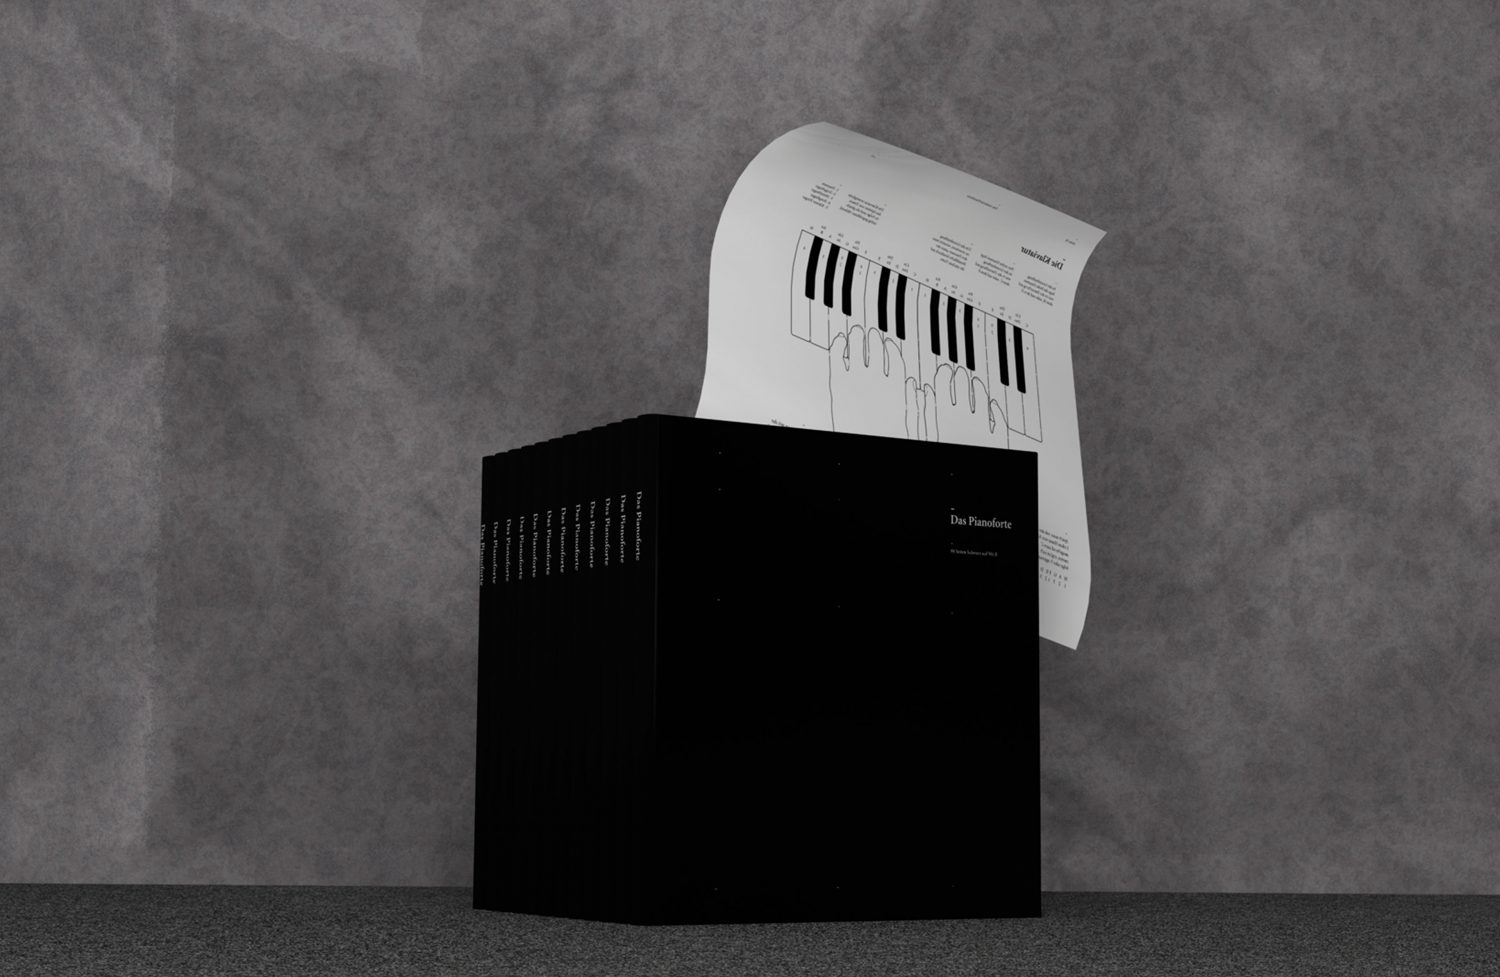 Pianoforte — 88 pages in black and white